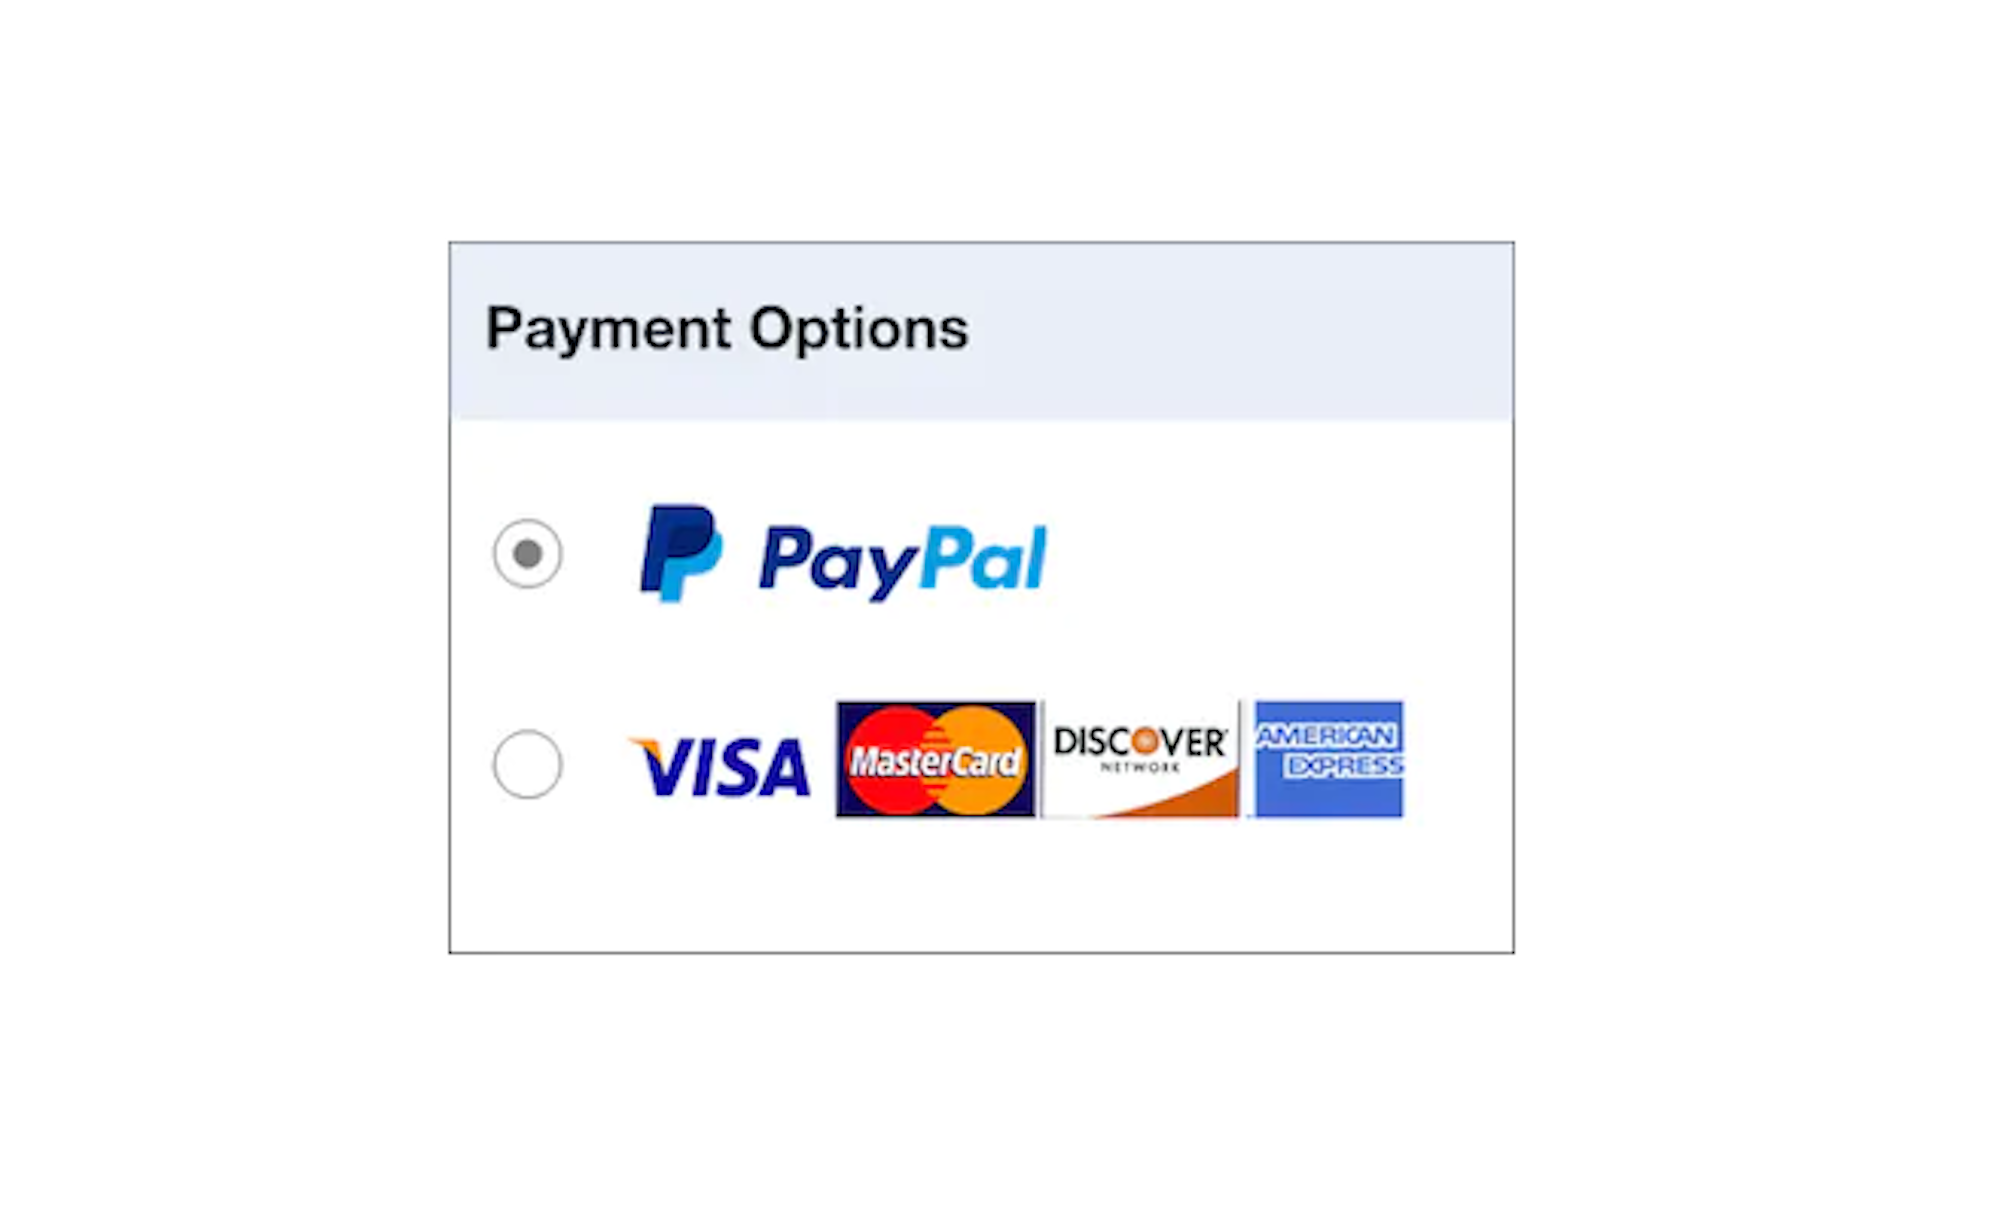 Encourage Various Payment Options